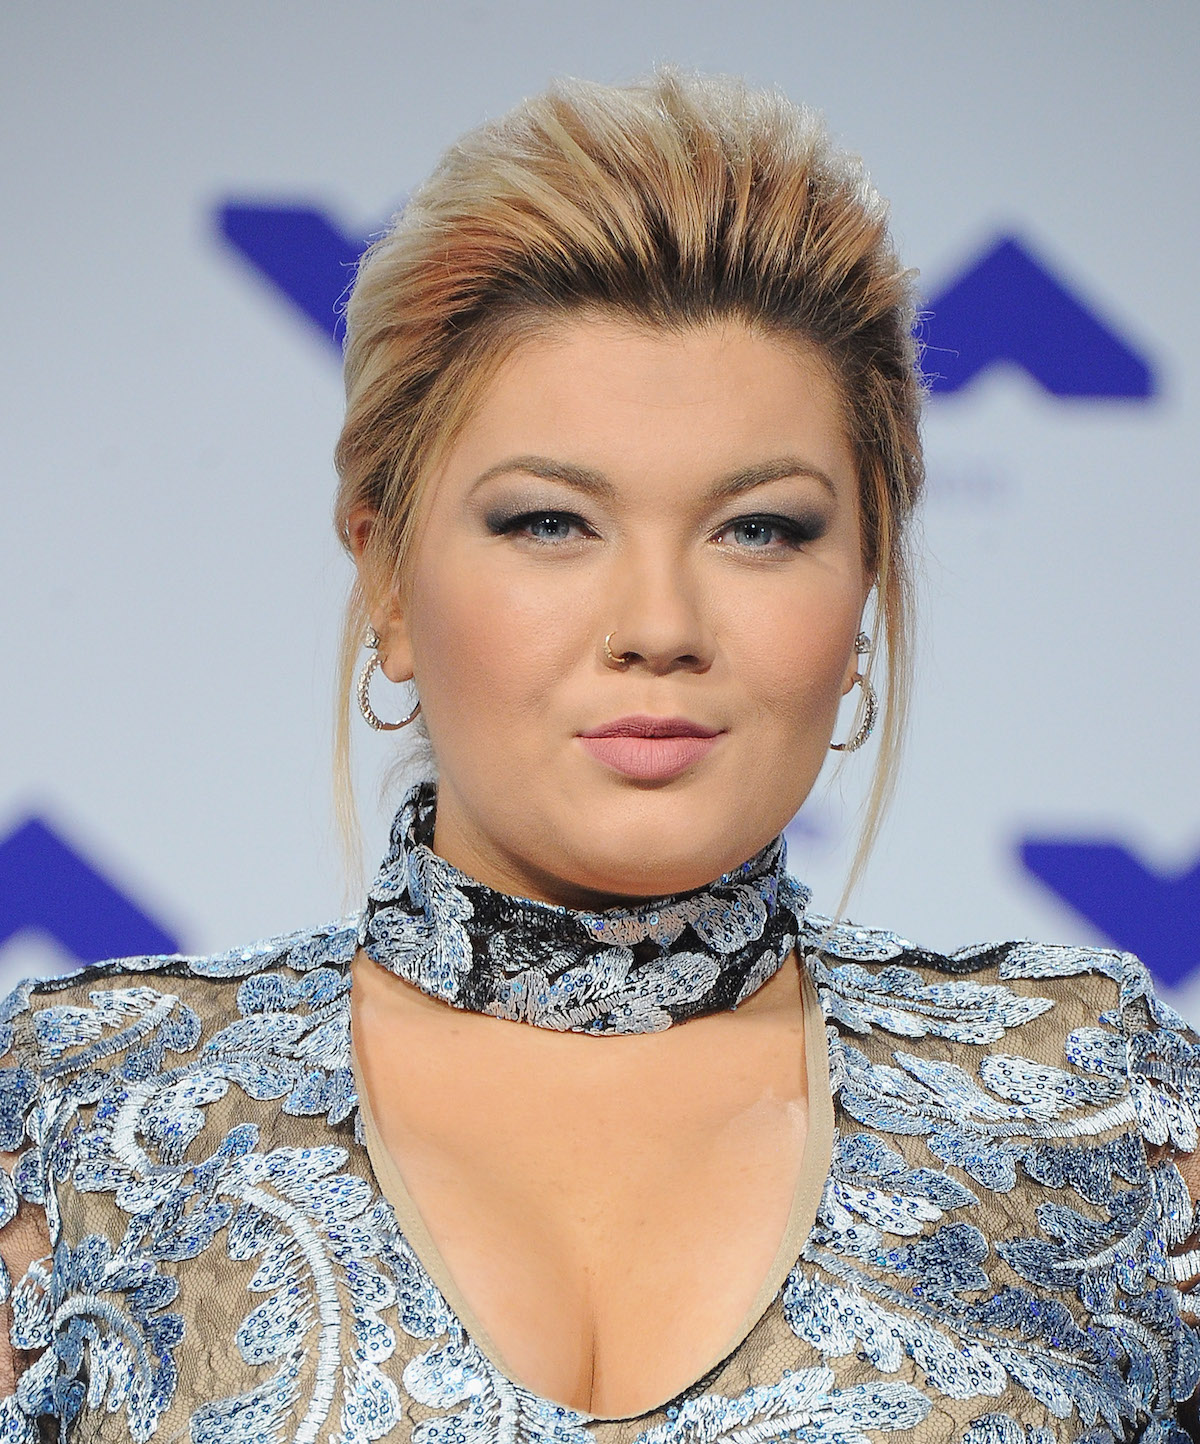 ‘Teen Mom OG’ Star Amber Portwood Reveals She Hasn’t Seen Her Daughter in a Shockingly Long Time